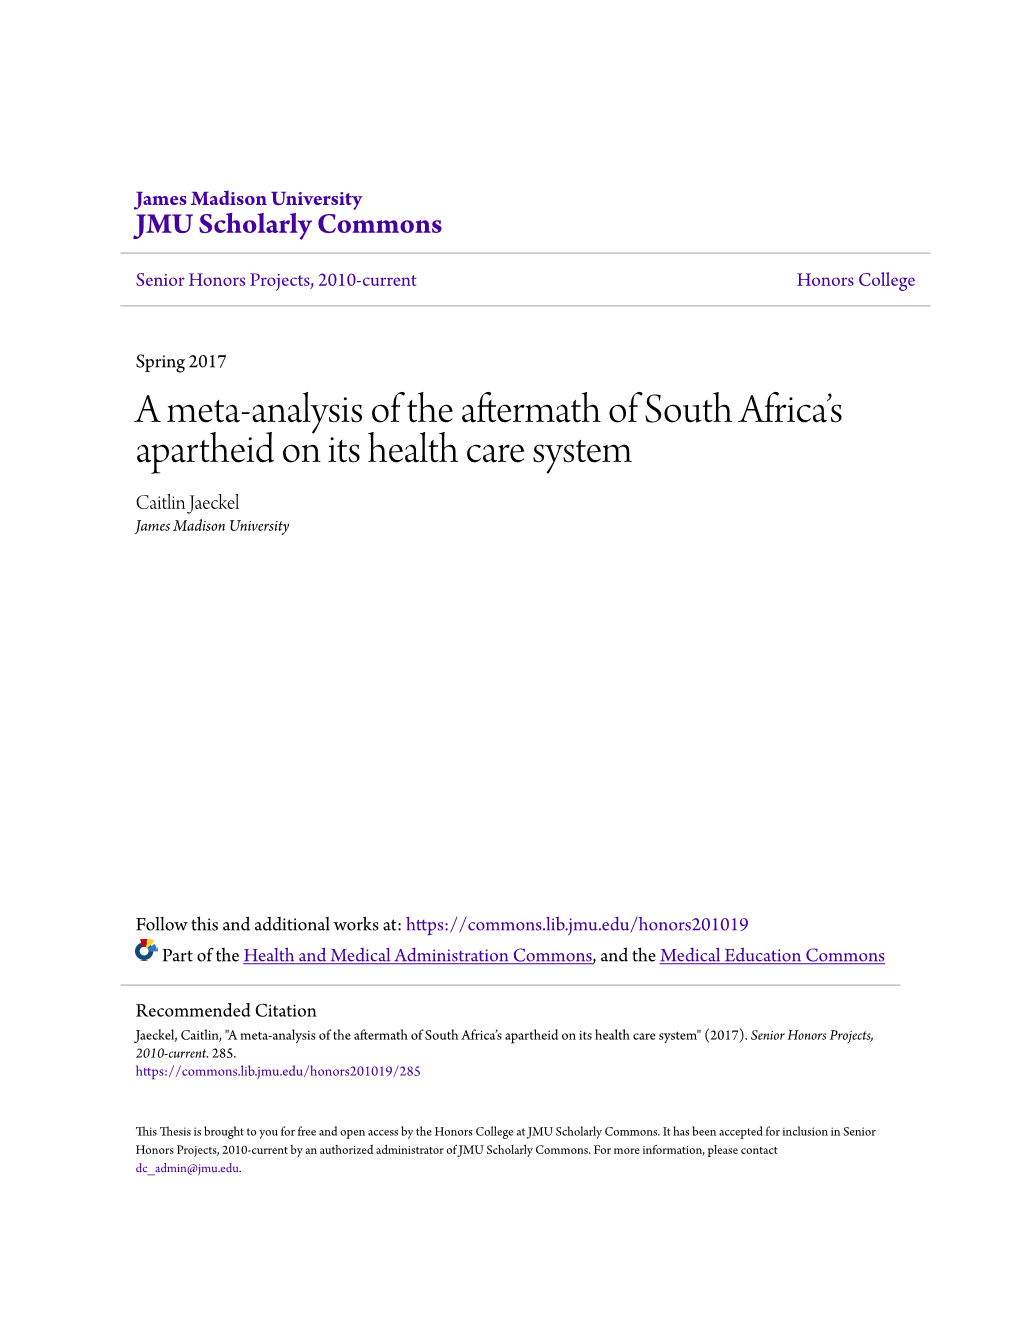 A Meta-Analysis of the Aftermath of South Africa's Apartheid on Its Health Care System